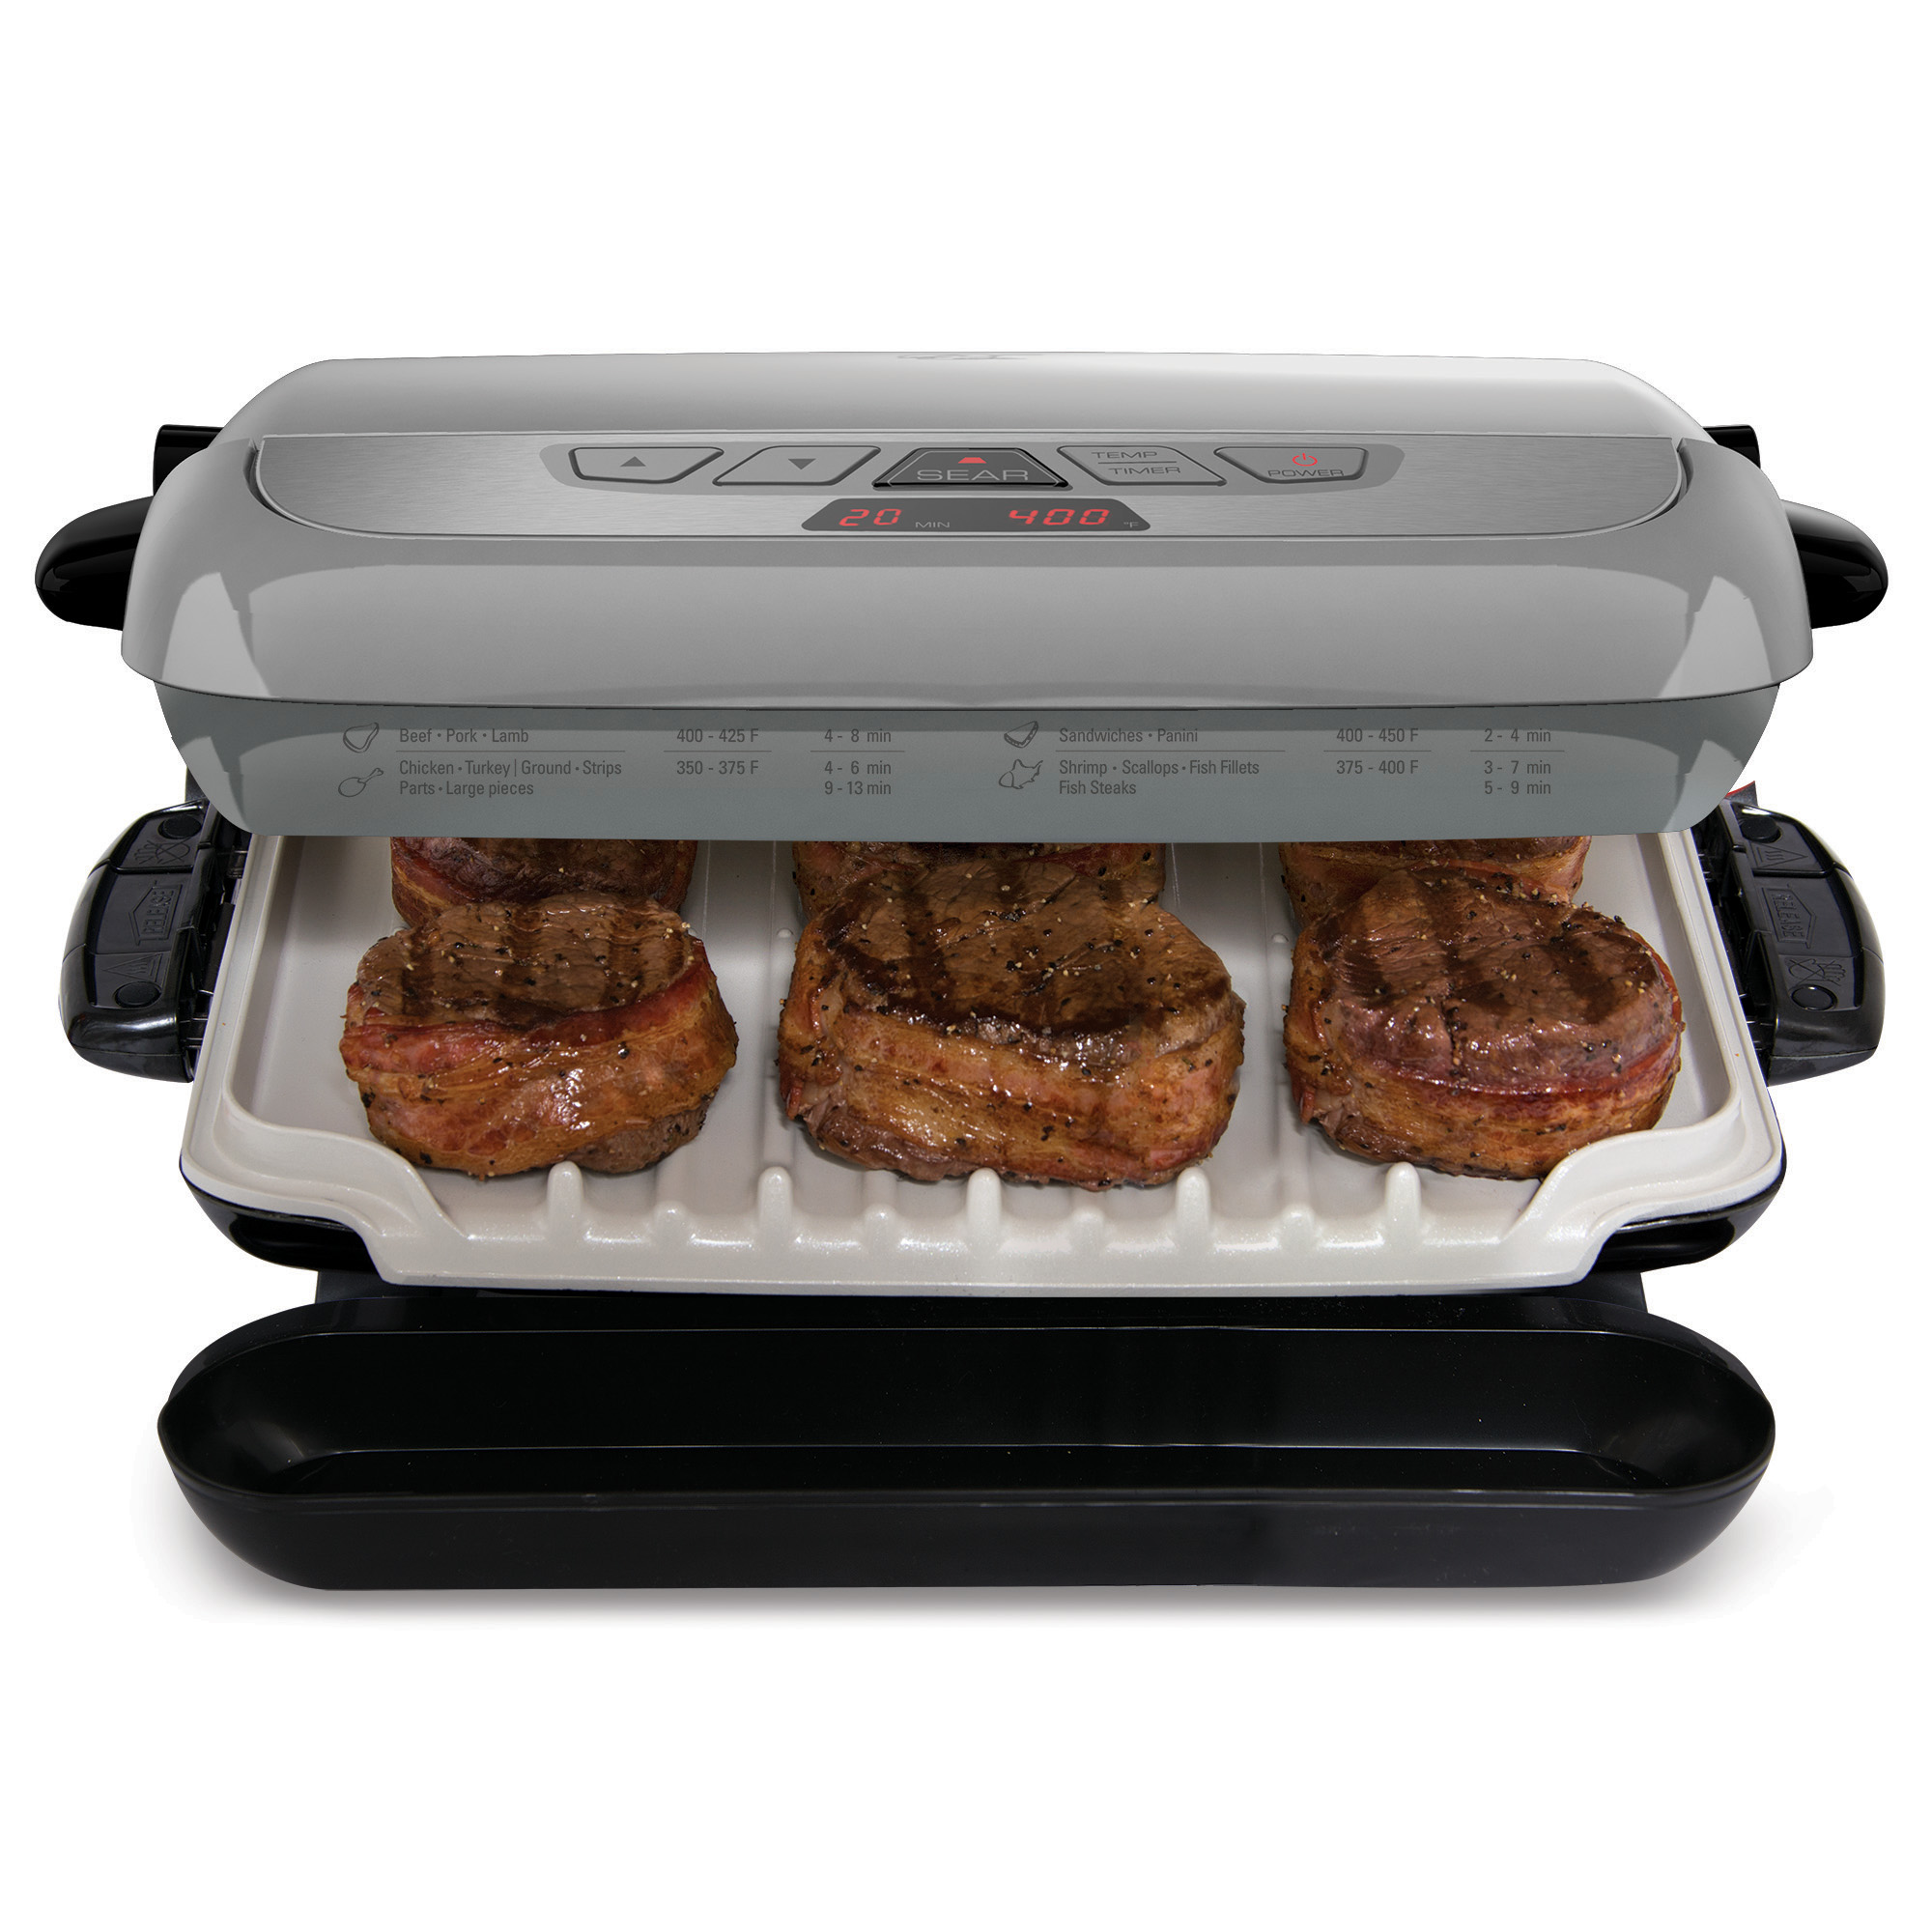 0027043994233 - GEORGE FOREMAN REMOVABLE PLATE 5 SERVING MULTI PLATE EVOLVE GRILL - APPLICA CONS